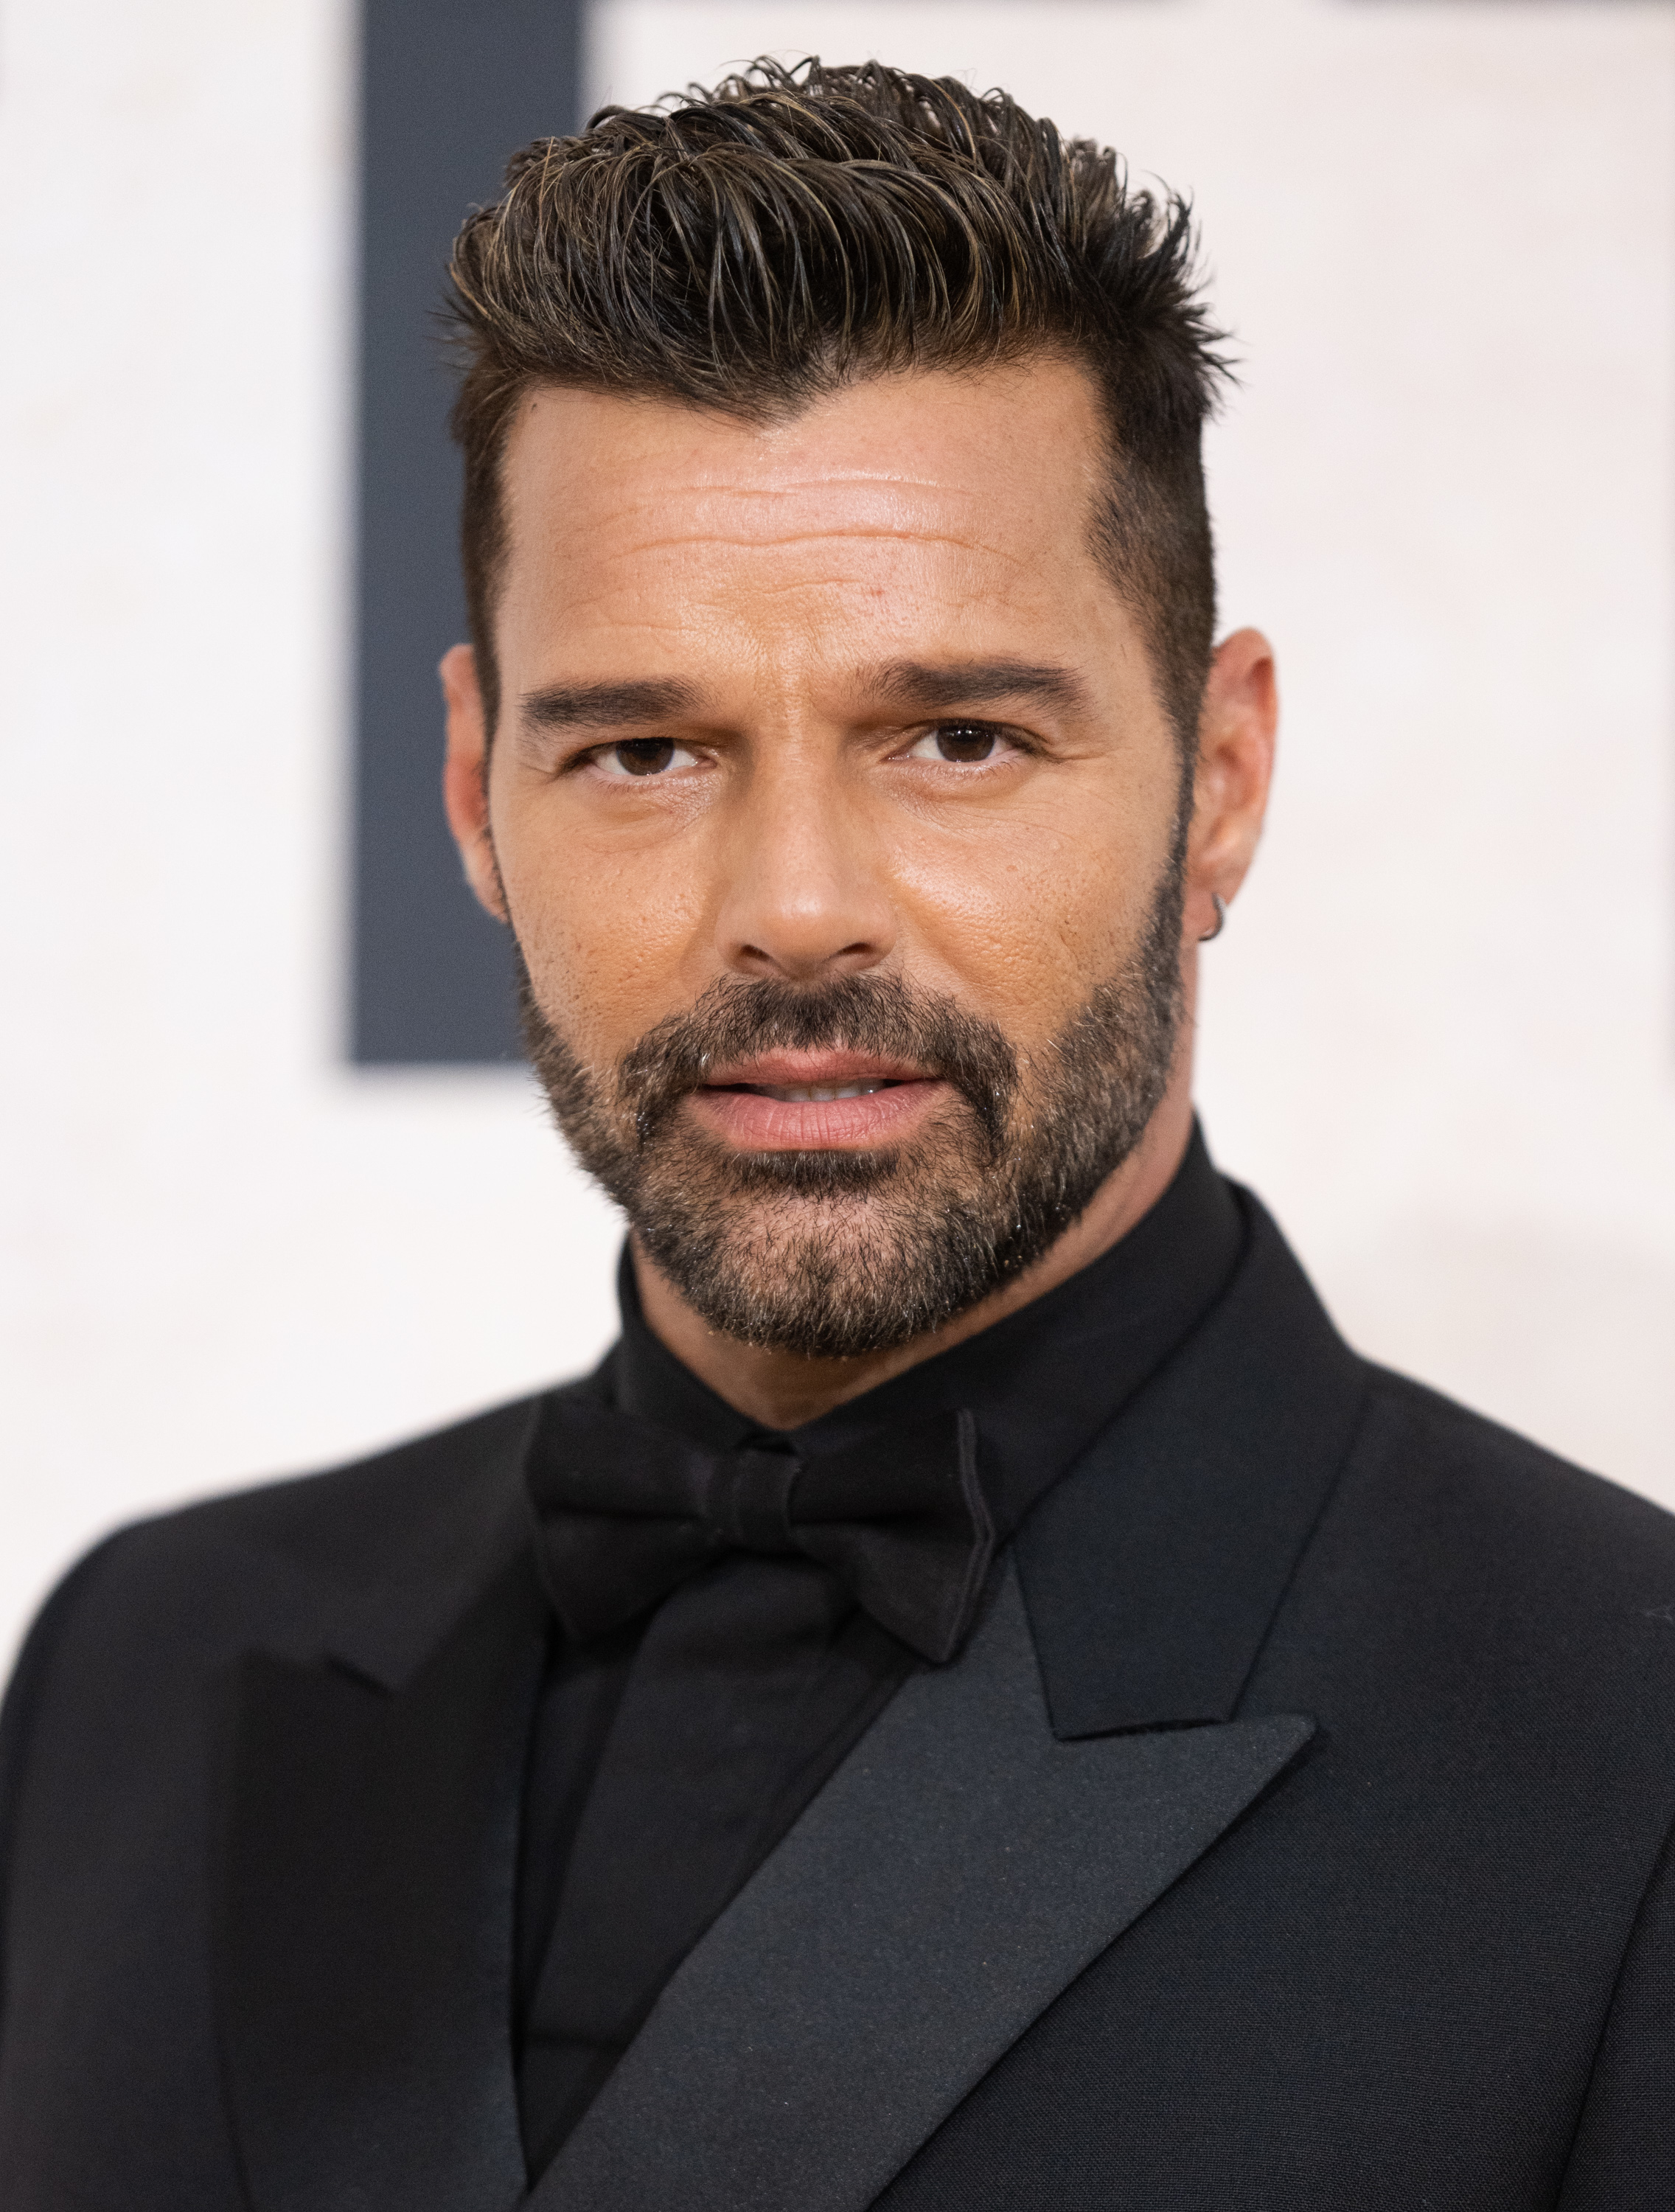 Ricky Martin in a black tuxedo with a bow tie at an event